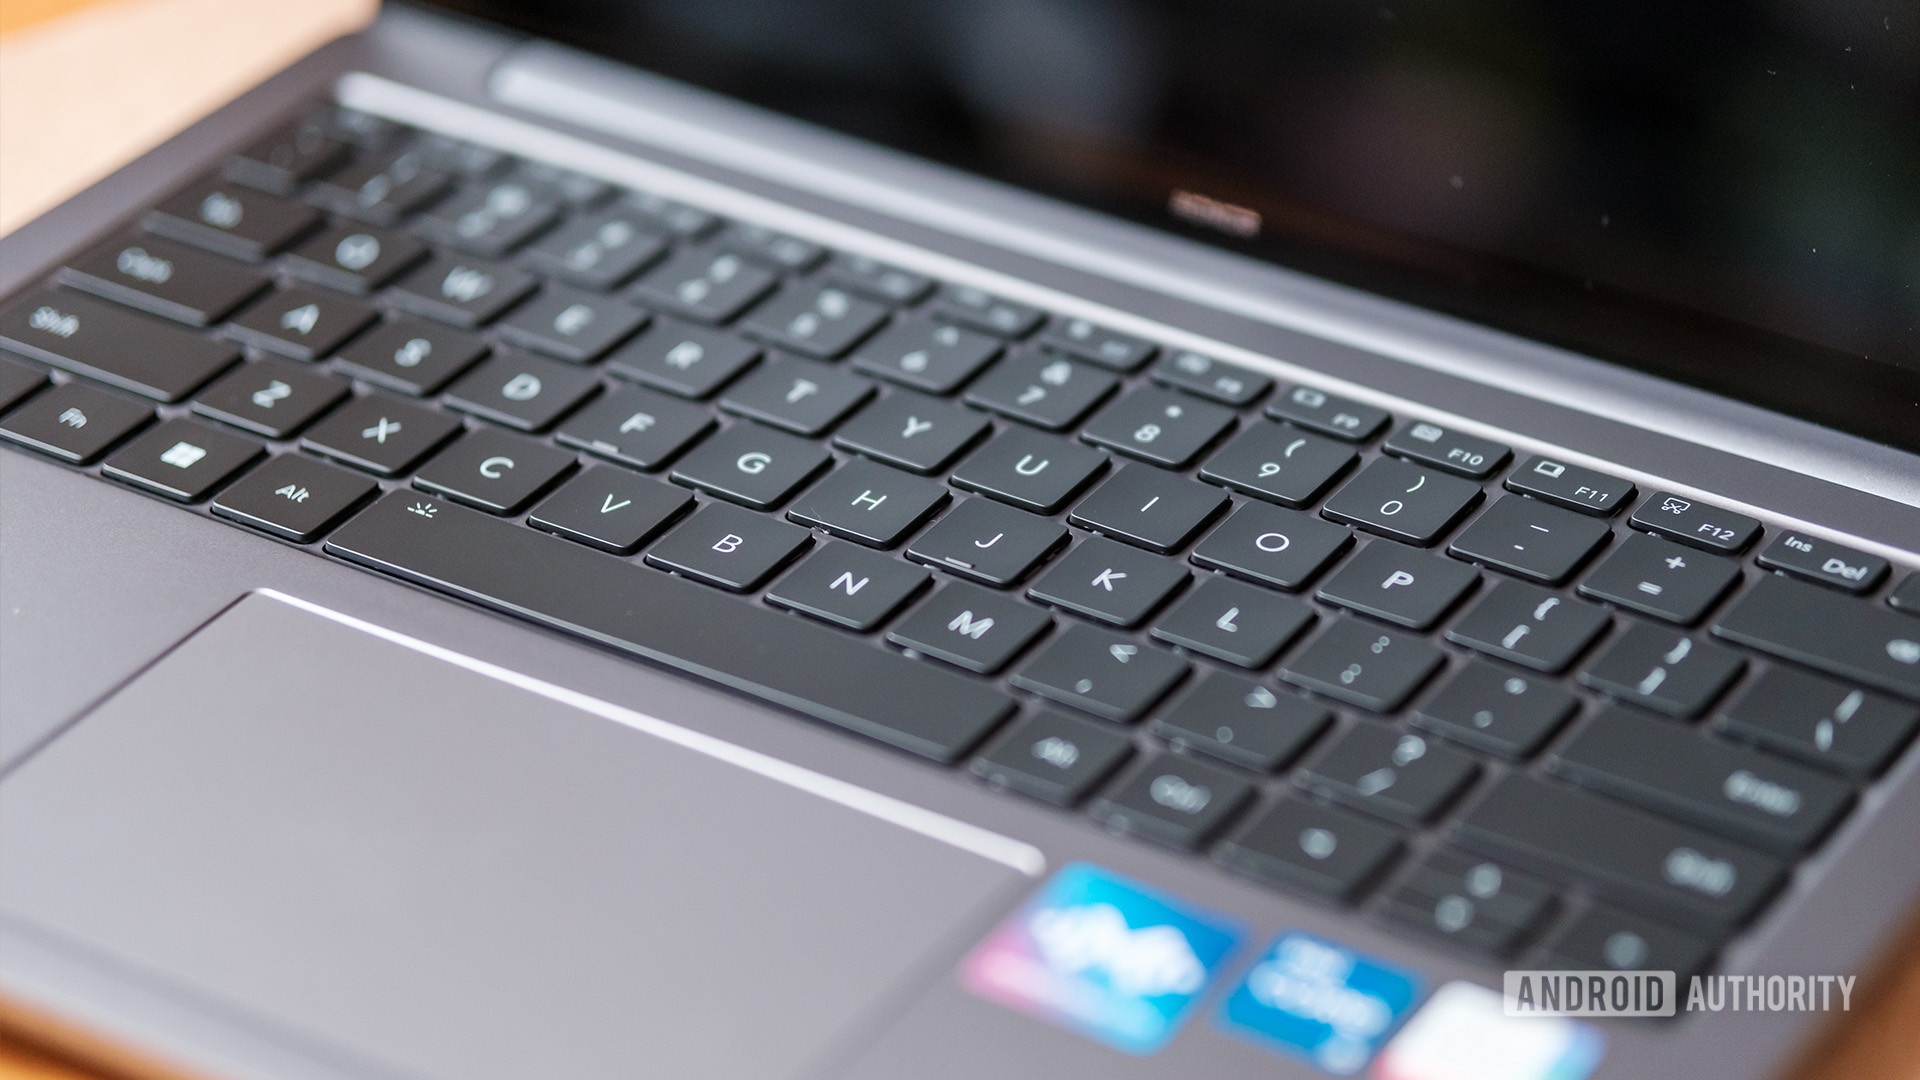 Connect a functioning external keyboard to the laptop
If the external keyboard works properly, it indicates a hardware issue with the laptop's built-in keyboard